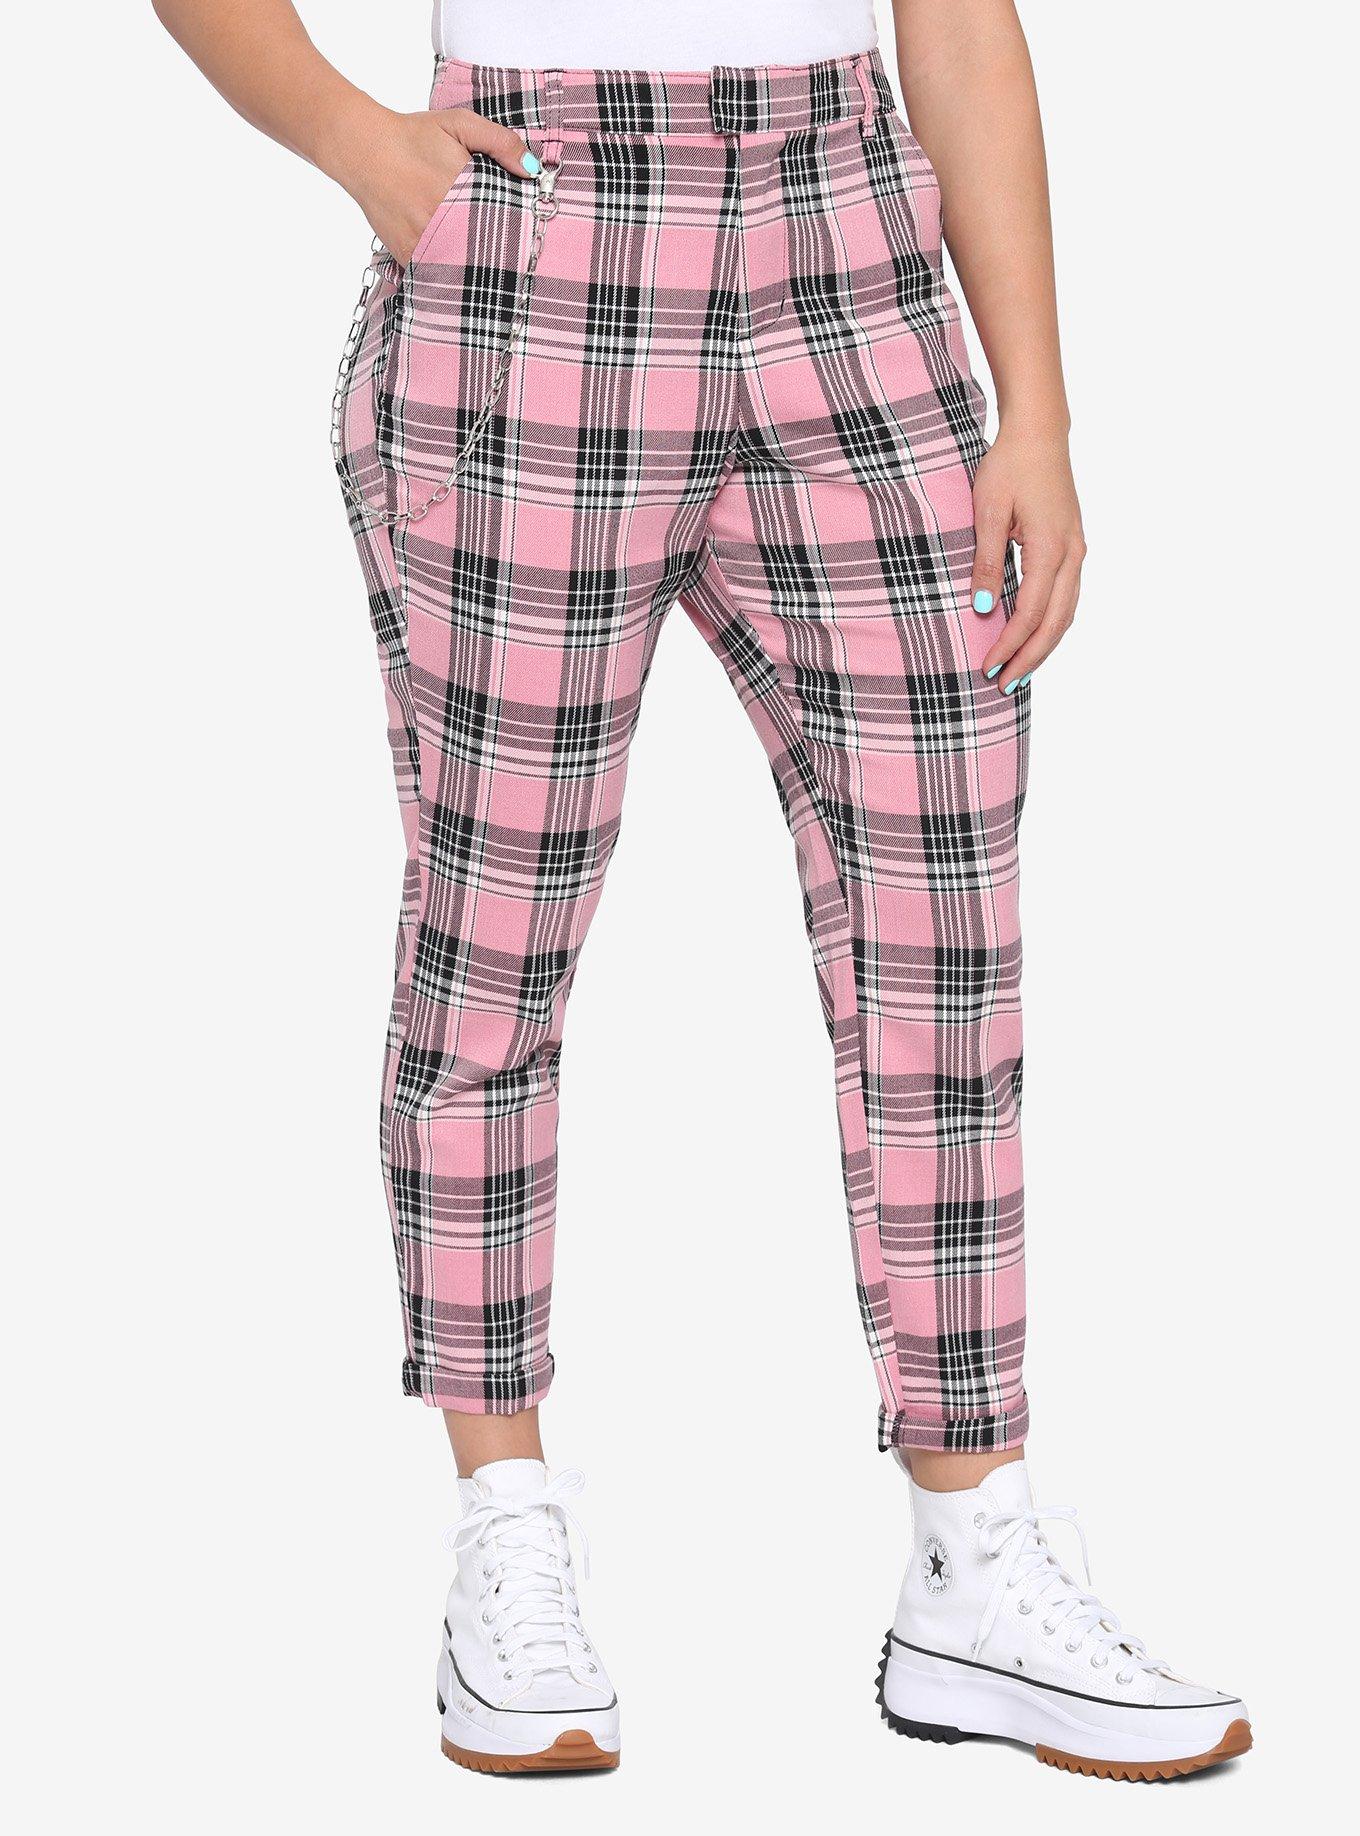 Hot Topic Pink Plaid Pants , size